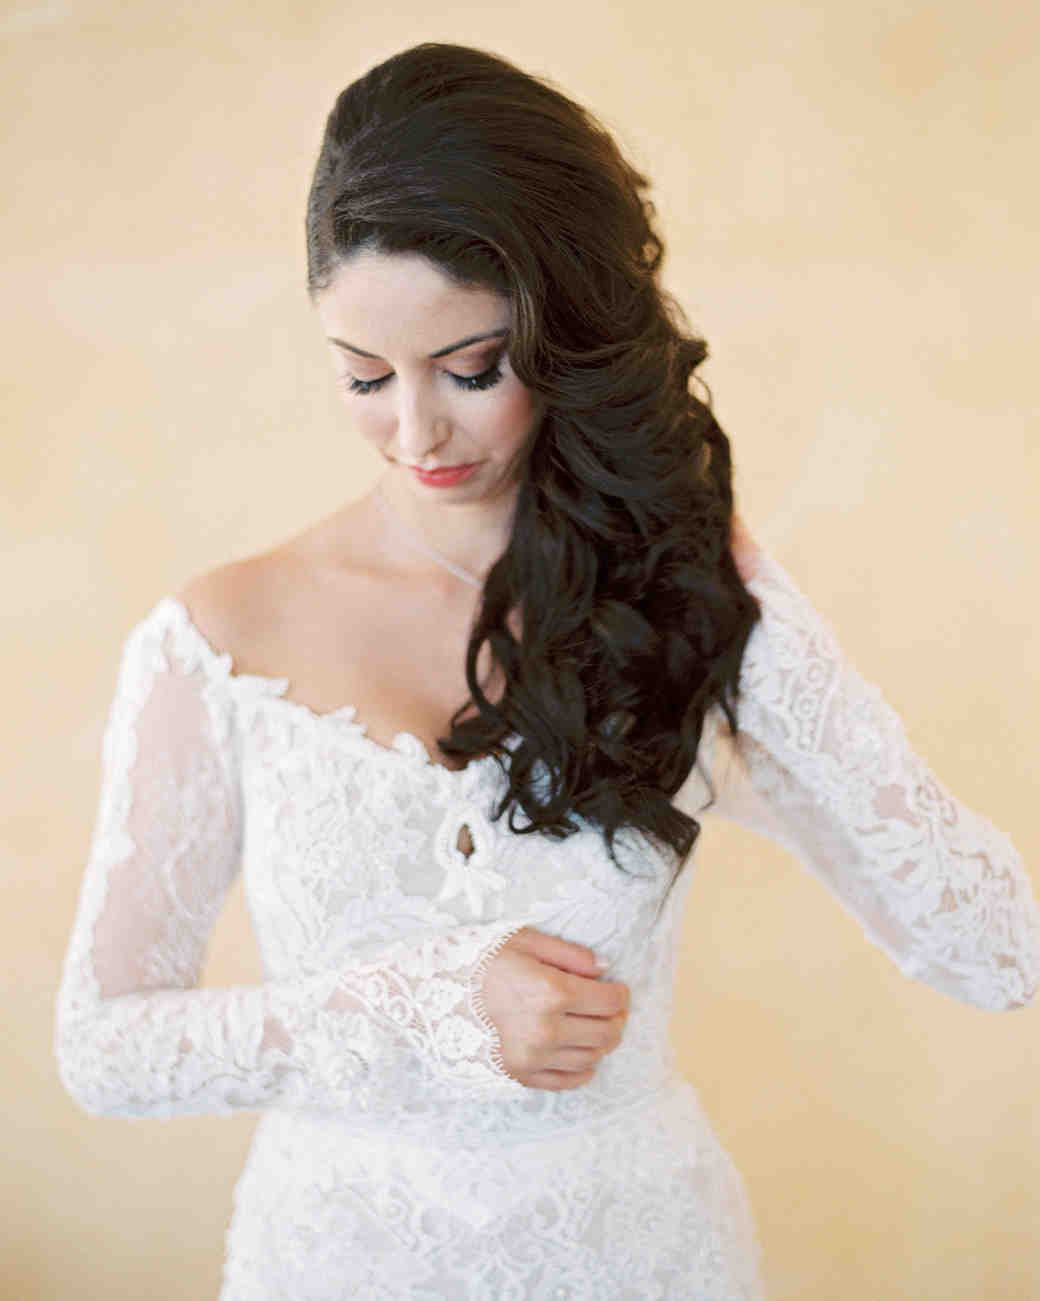 Wedding Hairstyles For One Shoulder Dress
 The Best Hairstyles for Every Wedding Dress Neckline